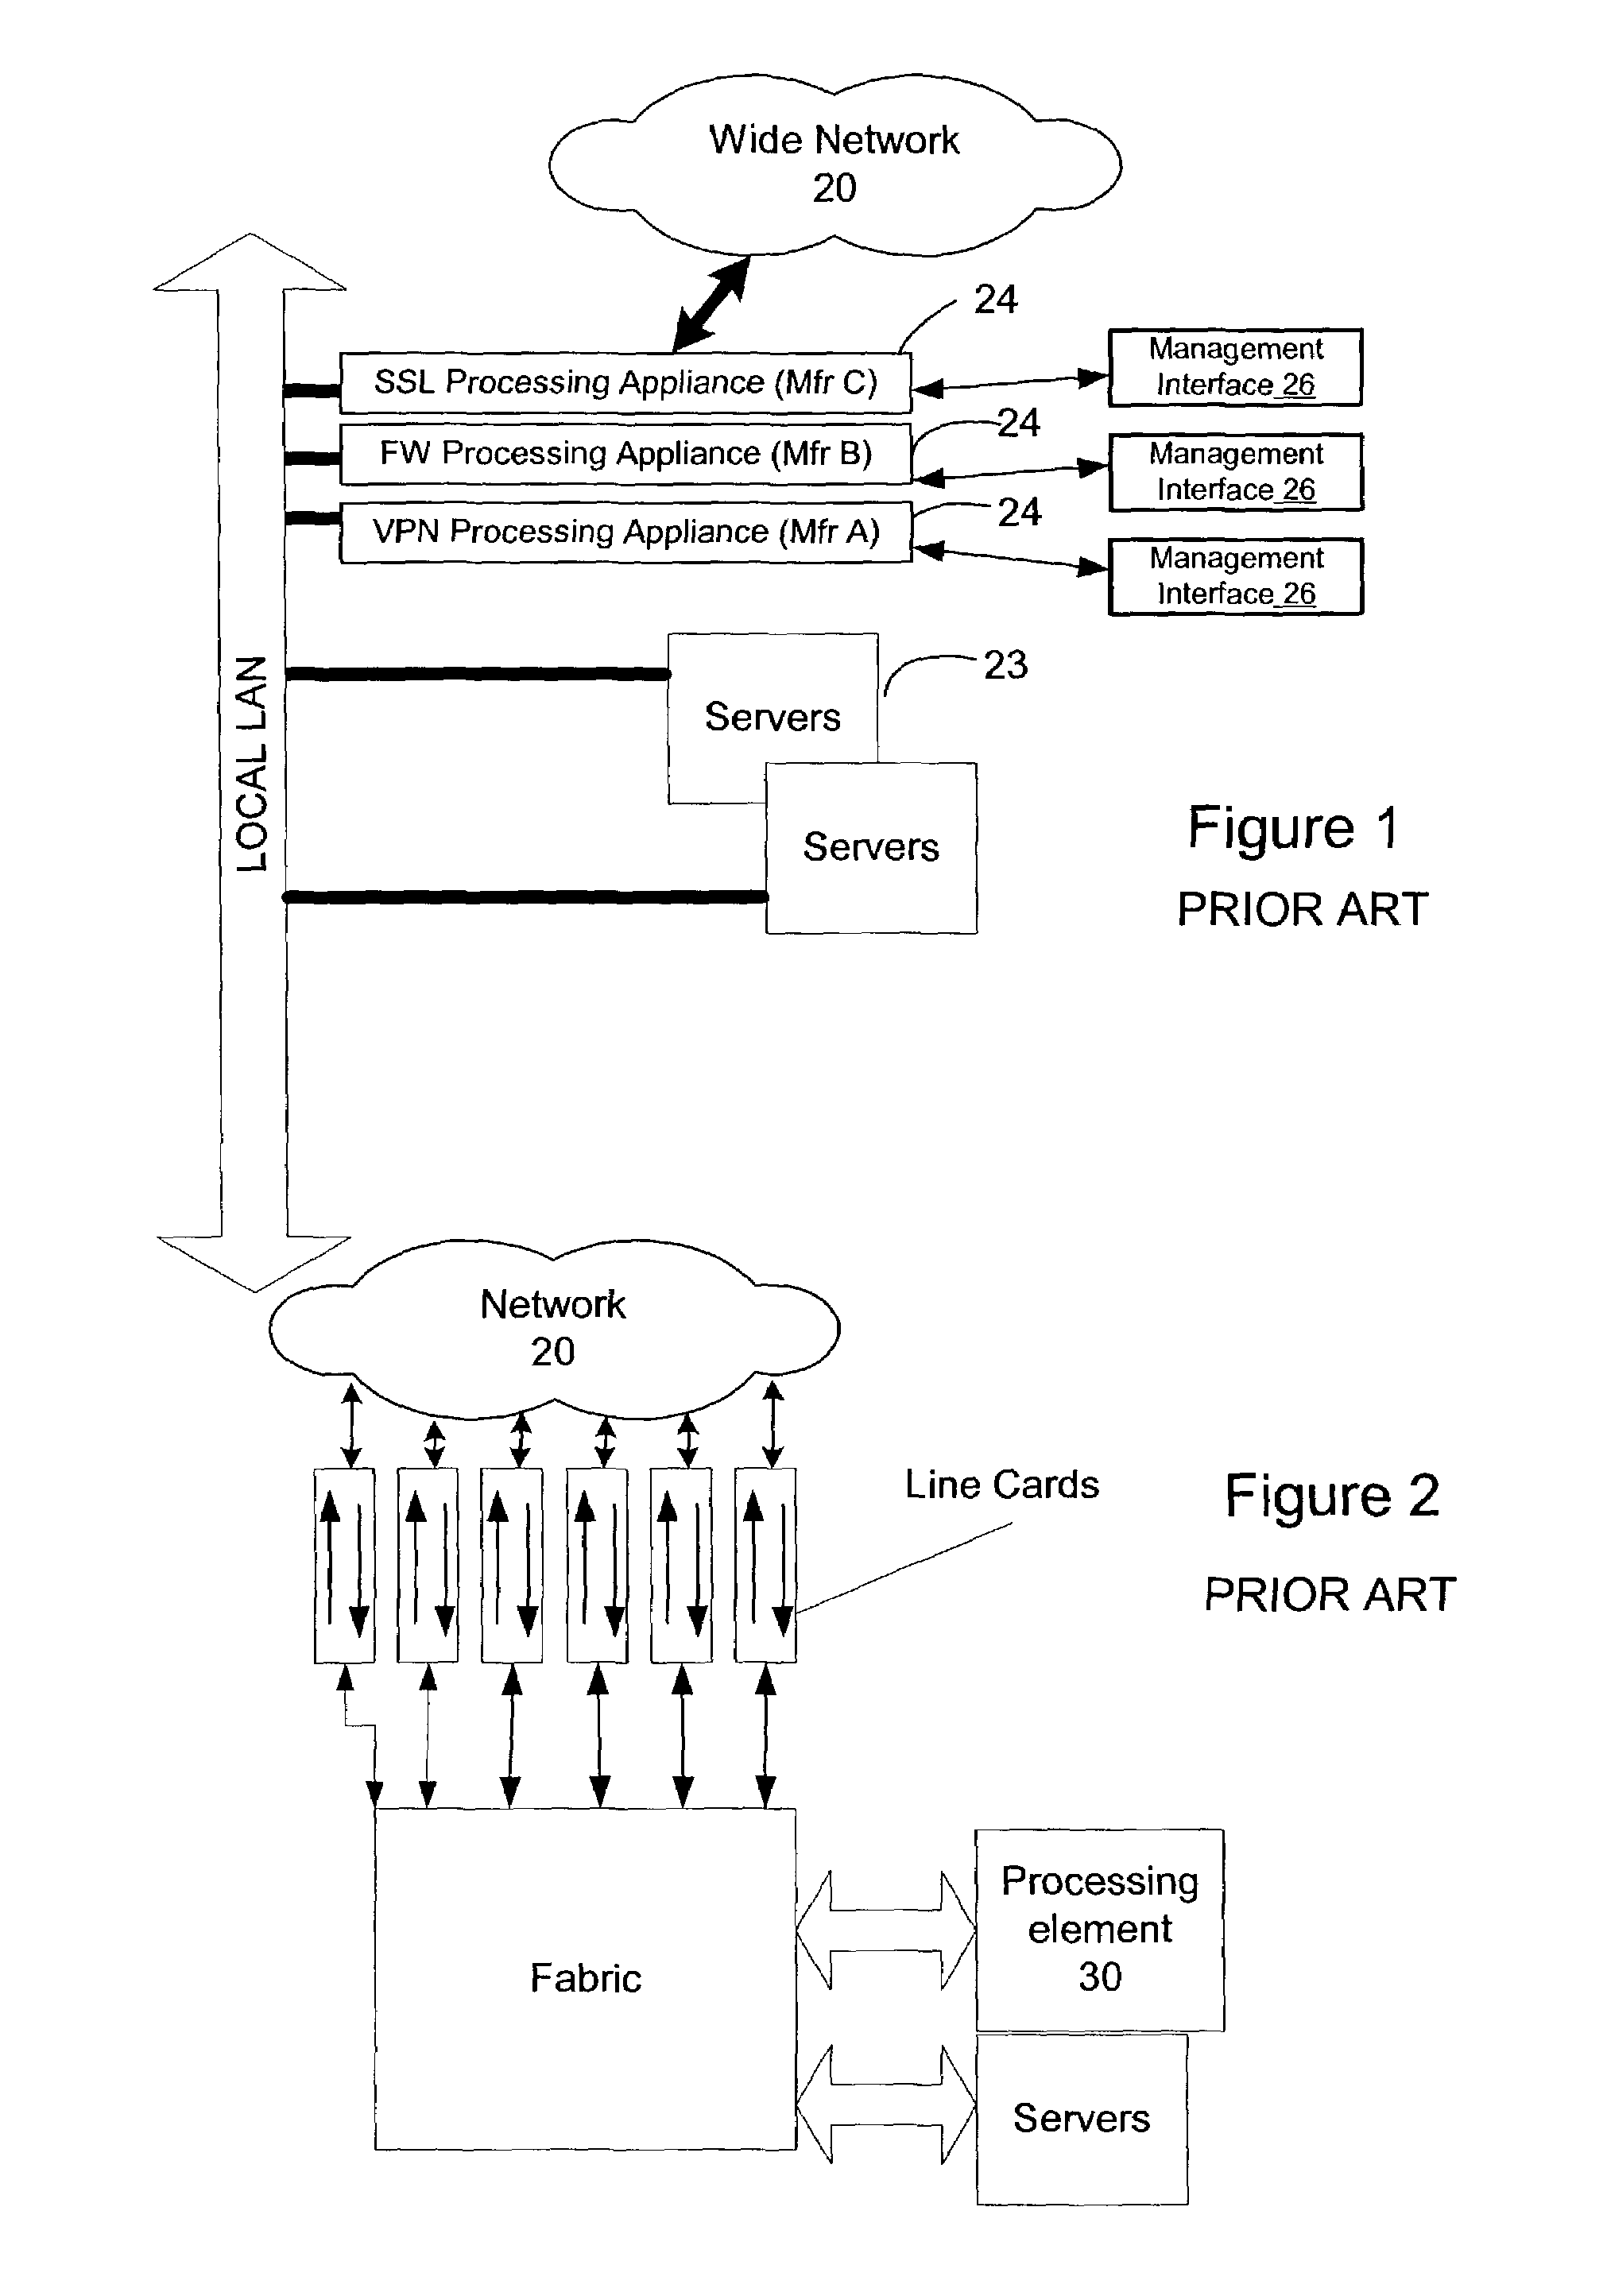 Content service aggregation device for a data center